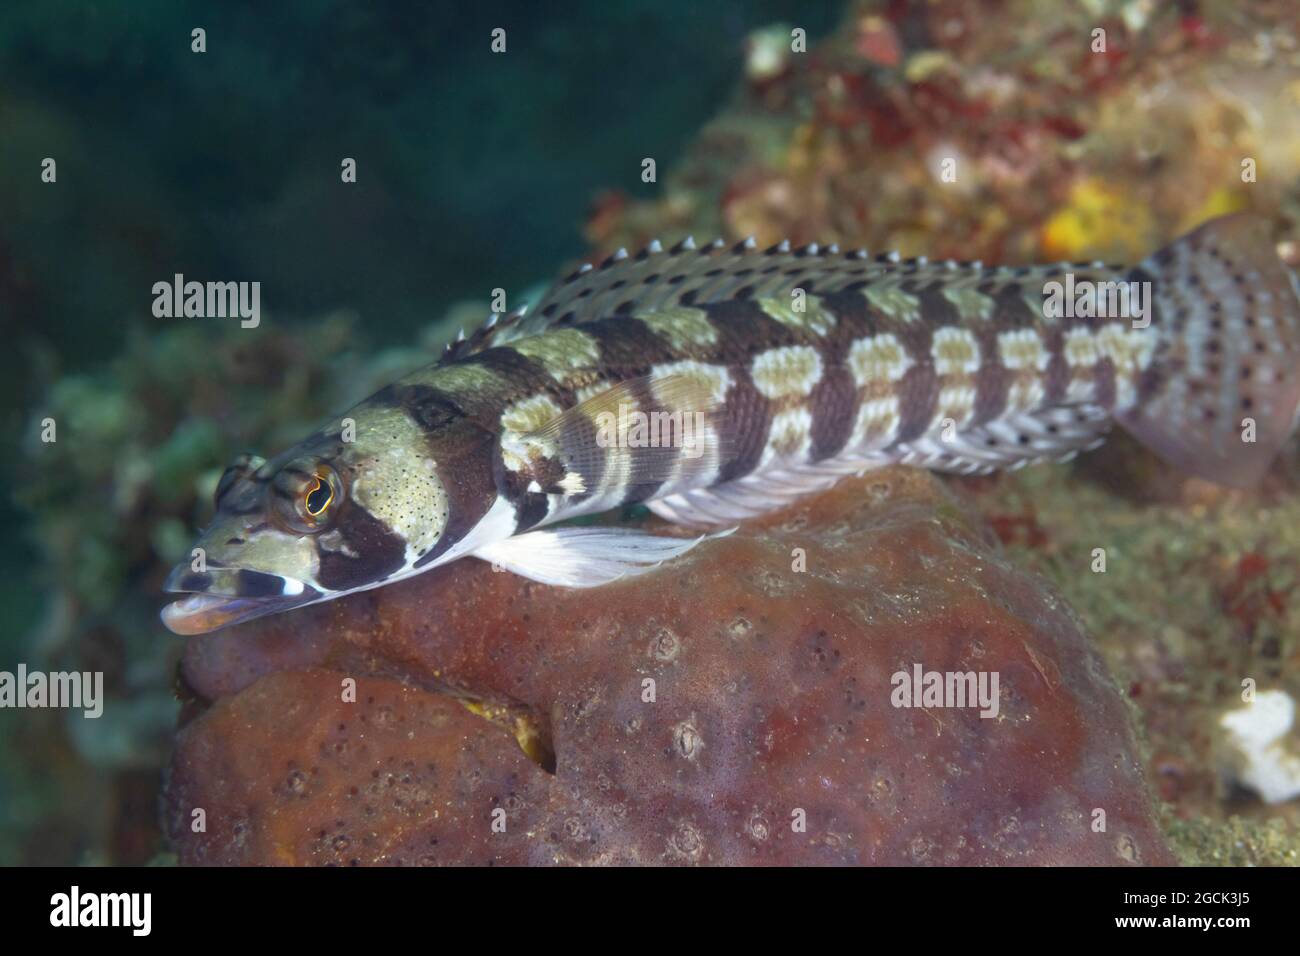 Closeup of tropical marine Reticulated sandperch or Parapercis tetracantha fish with long spotted body swimming in deep ocean water Stock Photo